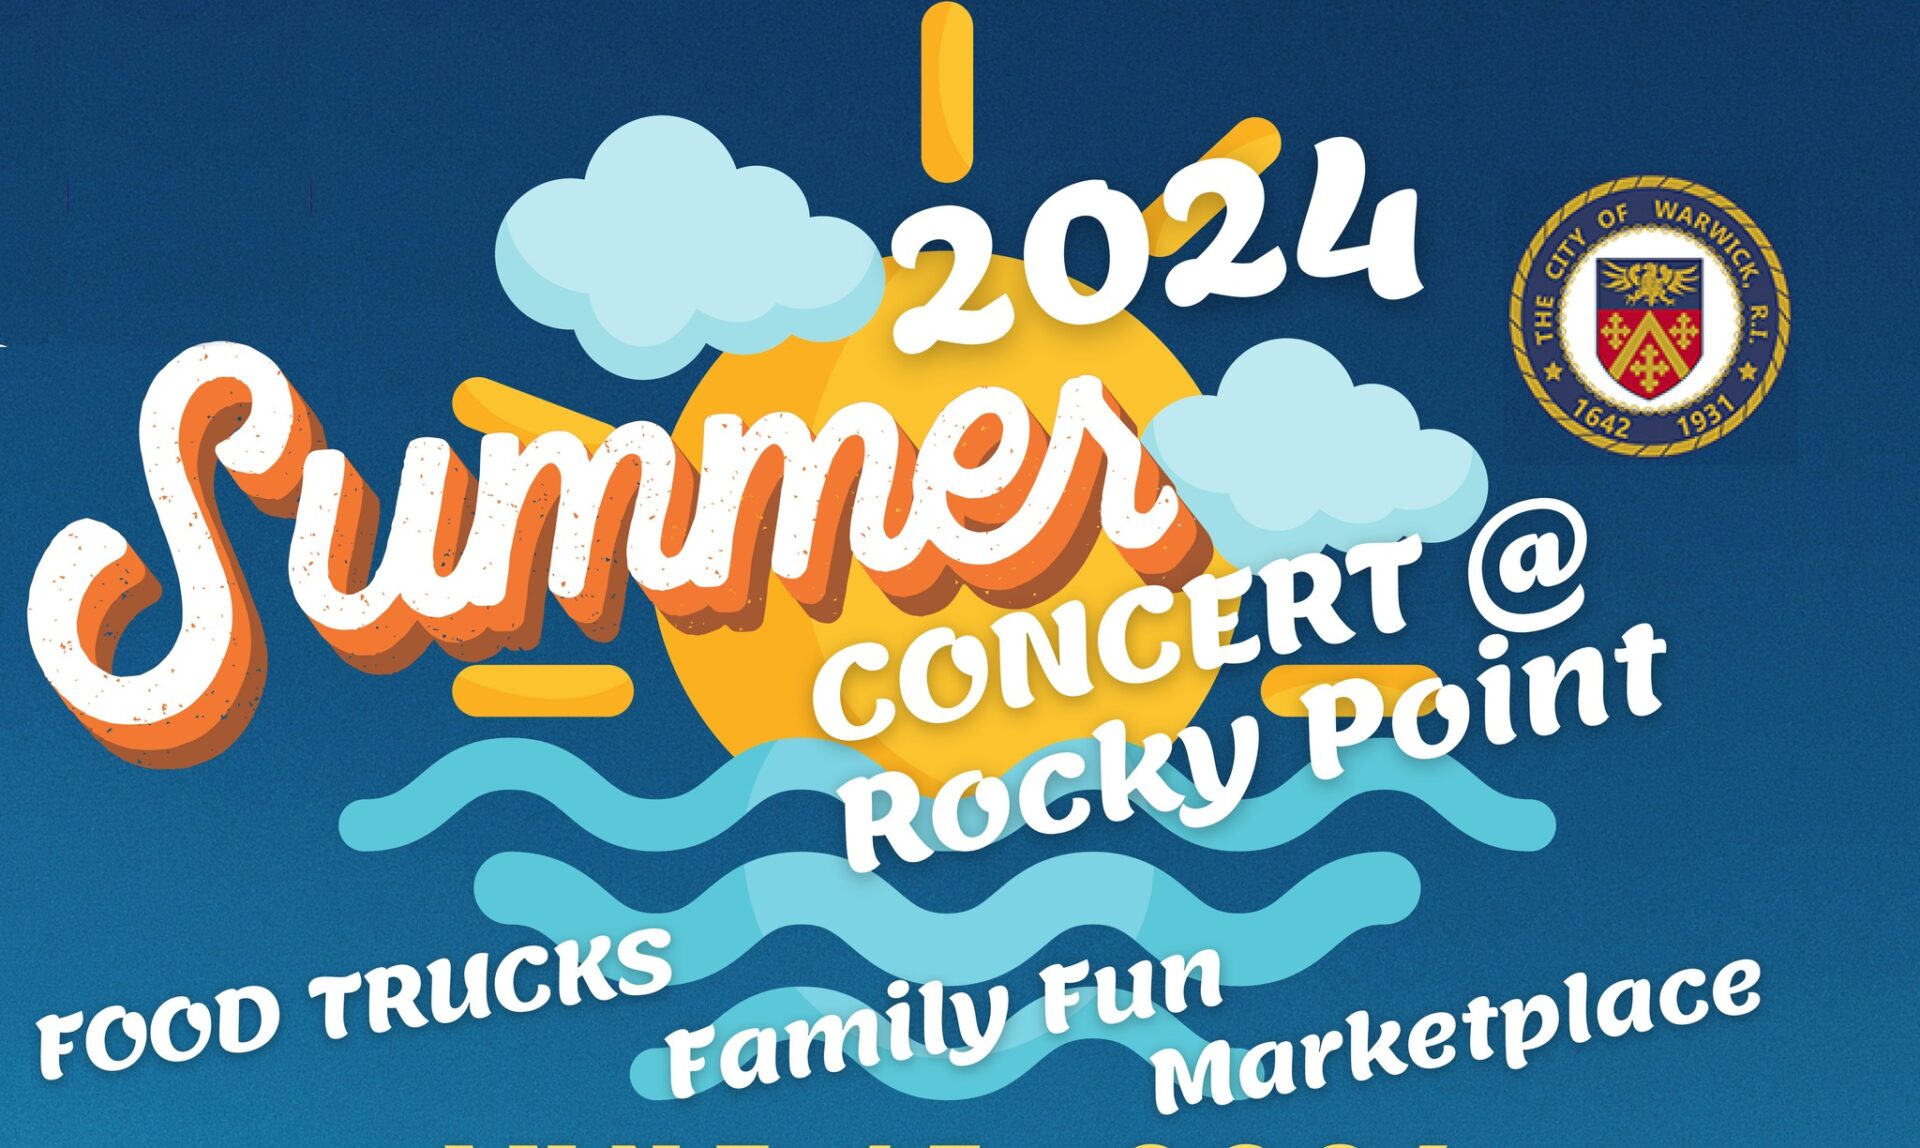 [City of Warwick] Warwick Parks and Recreation hosts a summer concert Saturday 9 a.m. till 3 p.m. at Rocky Point Park.